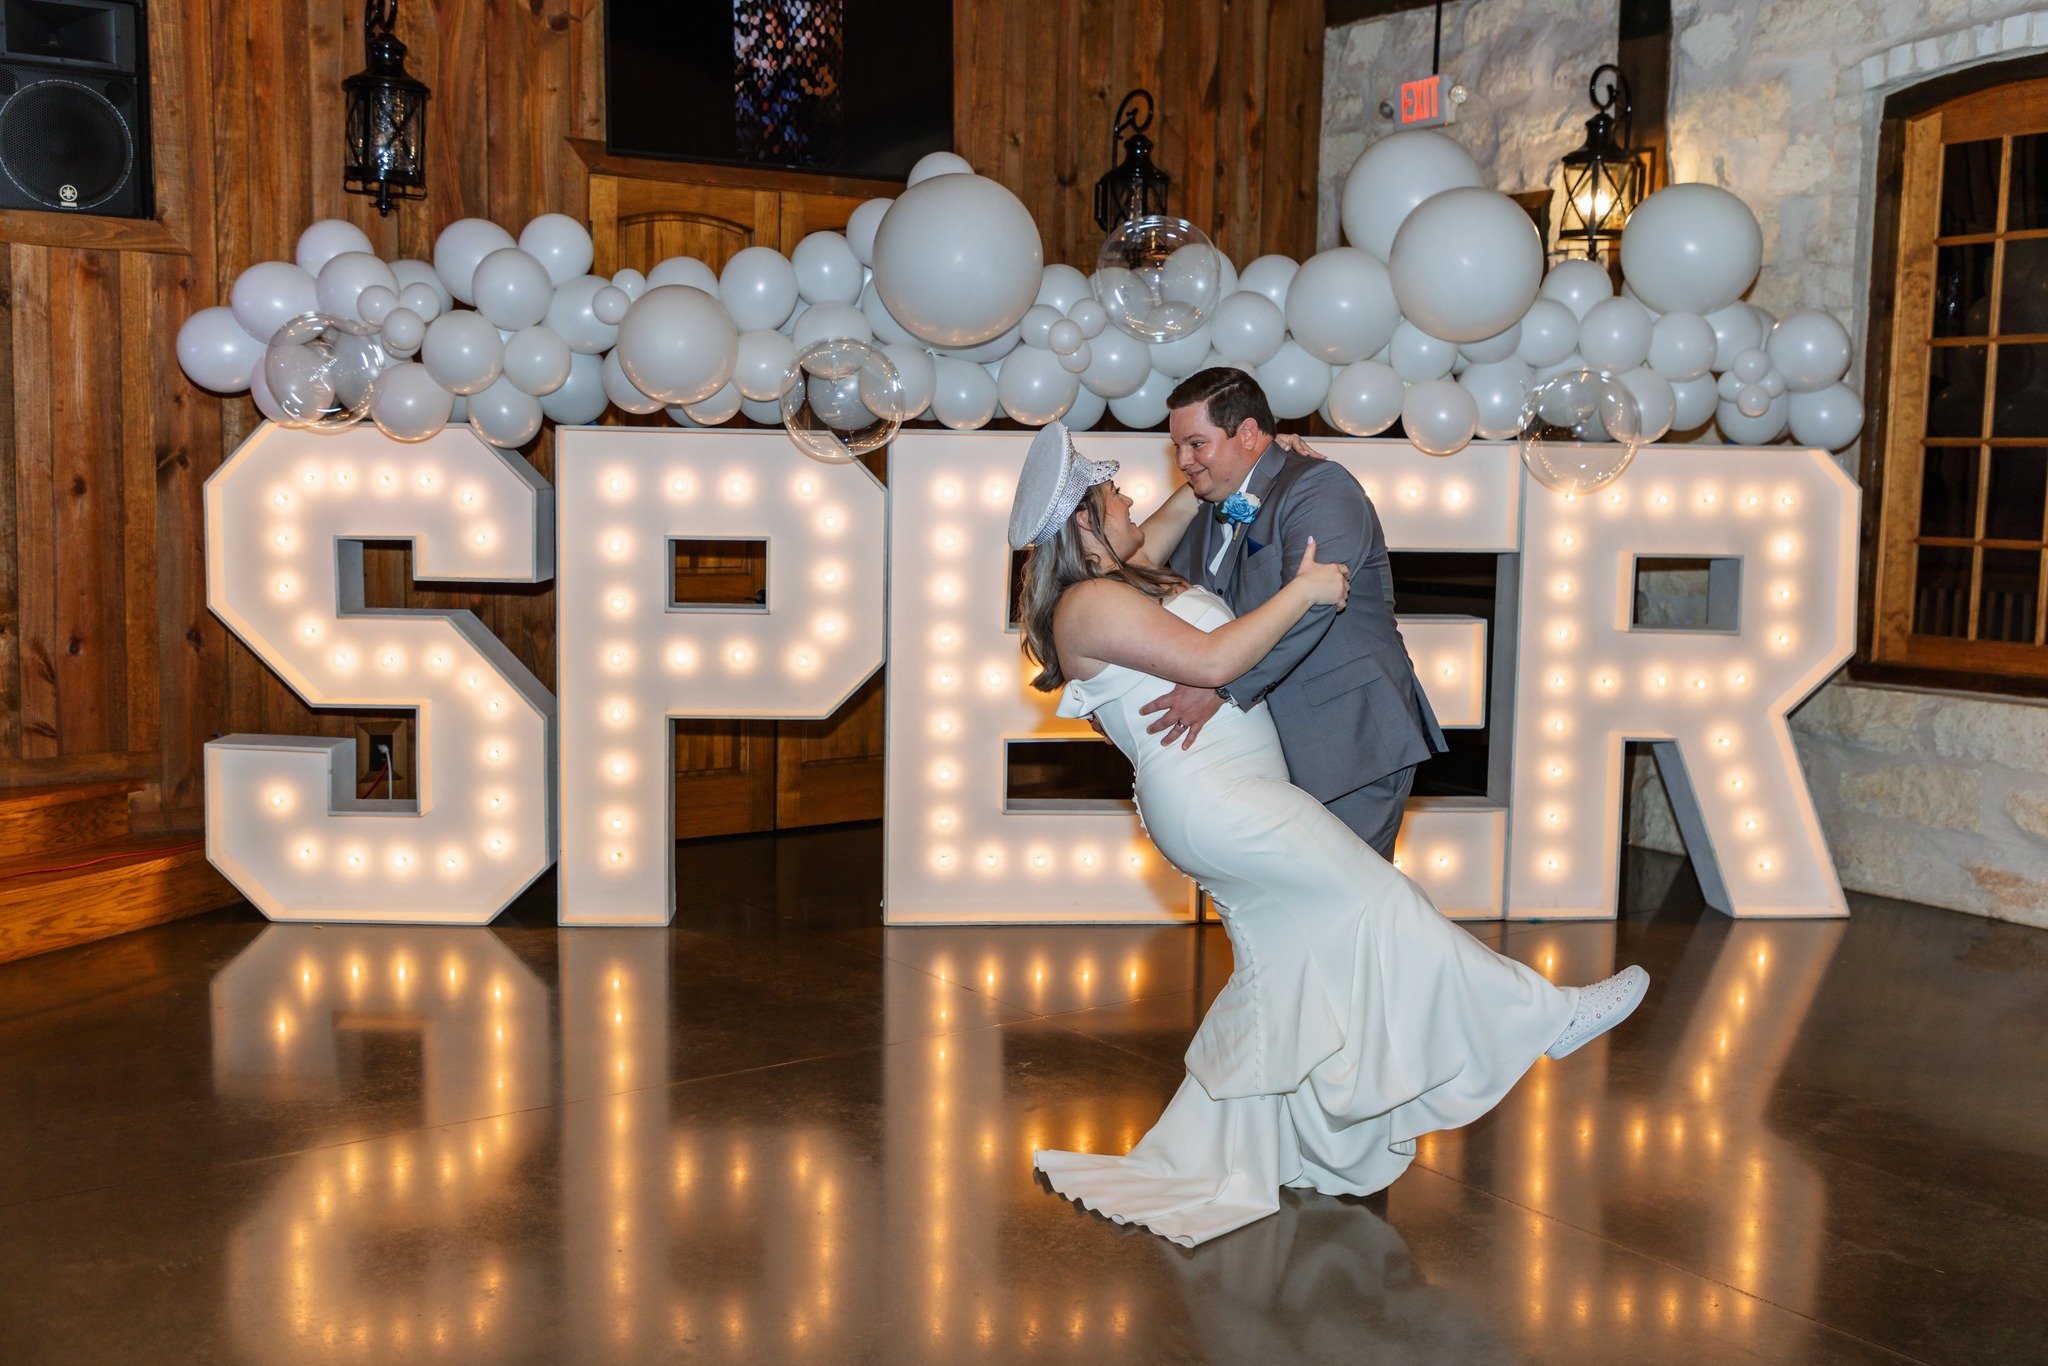 Let love light the way ✨💖 #WeddingMagic #marqueemoments 

Blog::
https://lacijamesphotography.com/blog/2024/5/5/the-artistry-of-wedding-marquee-letters-illuminating-love-stories